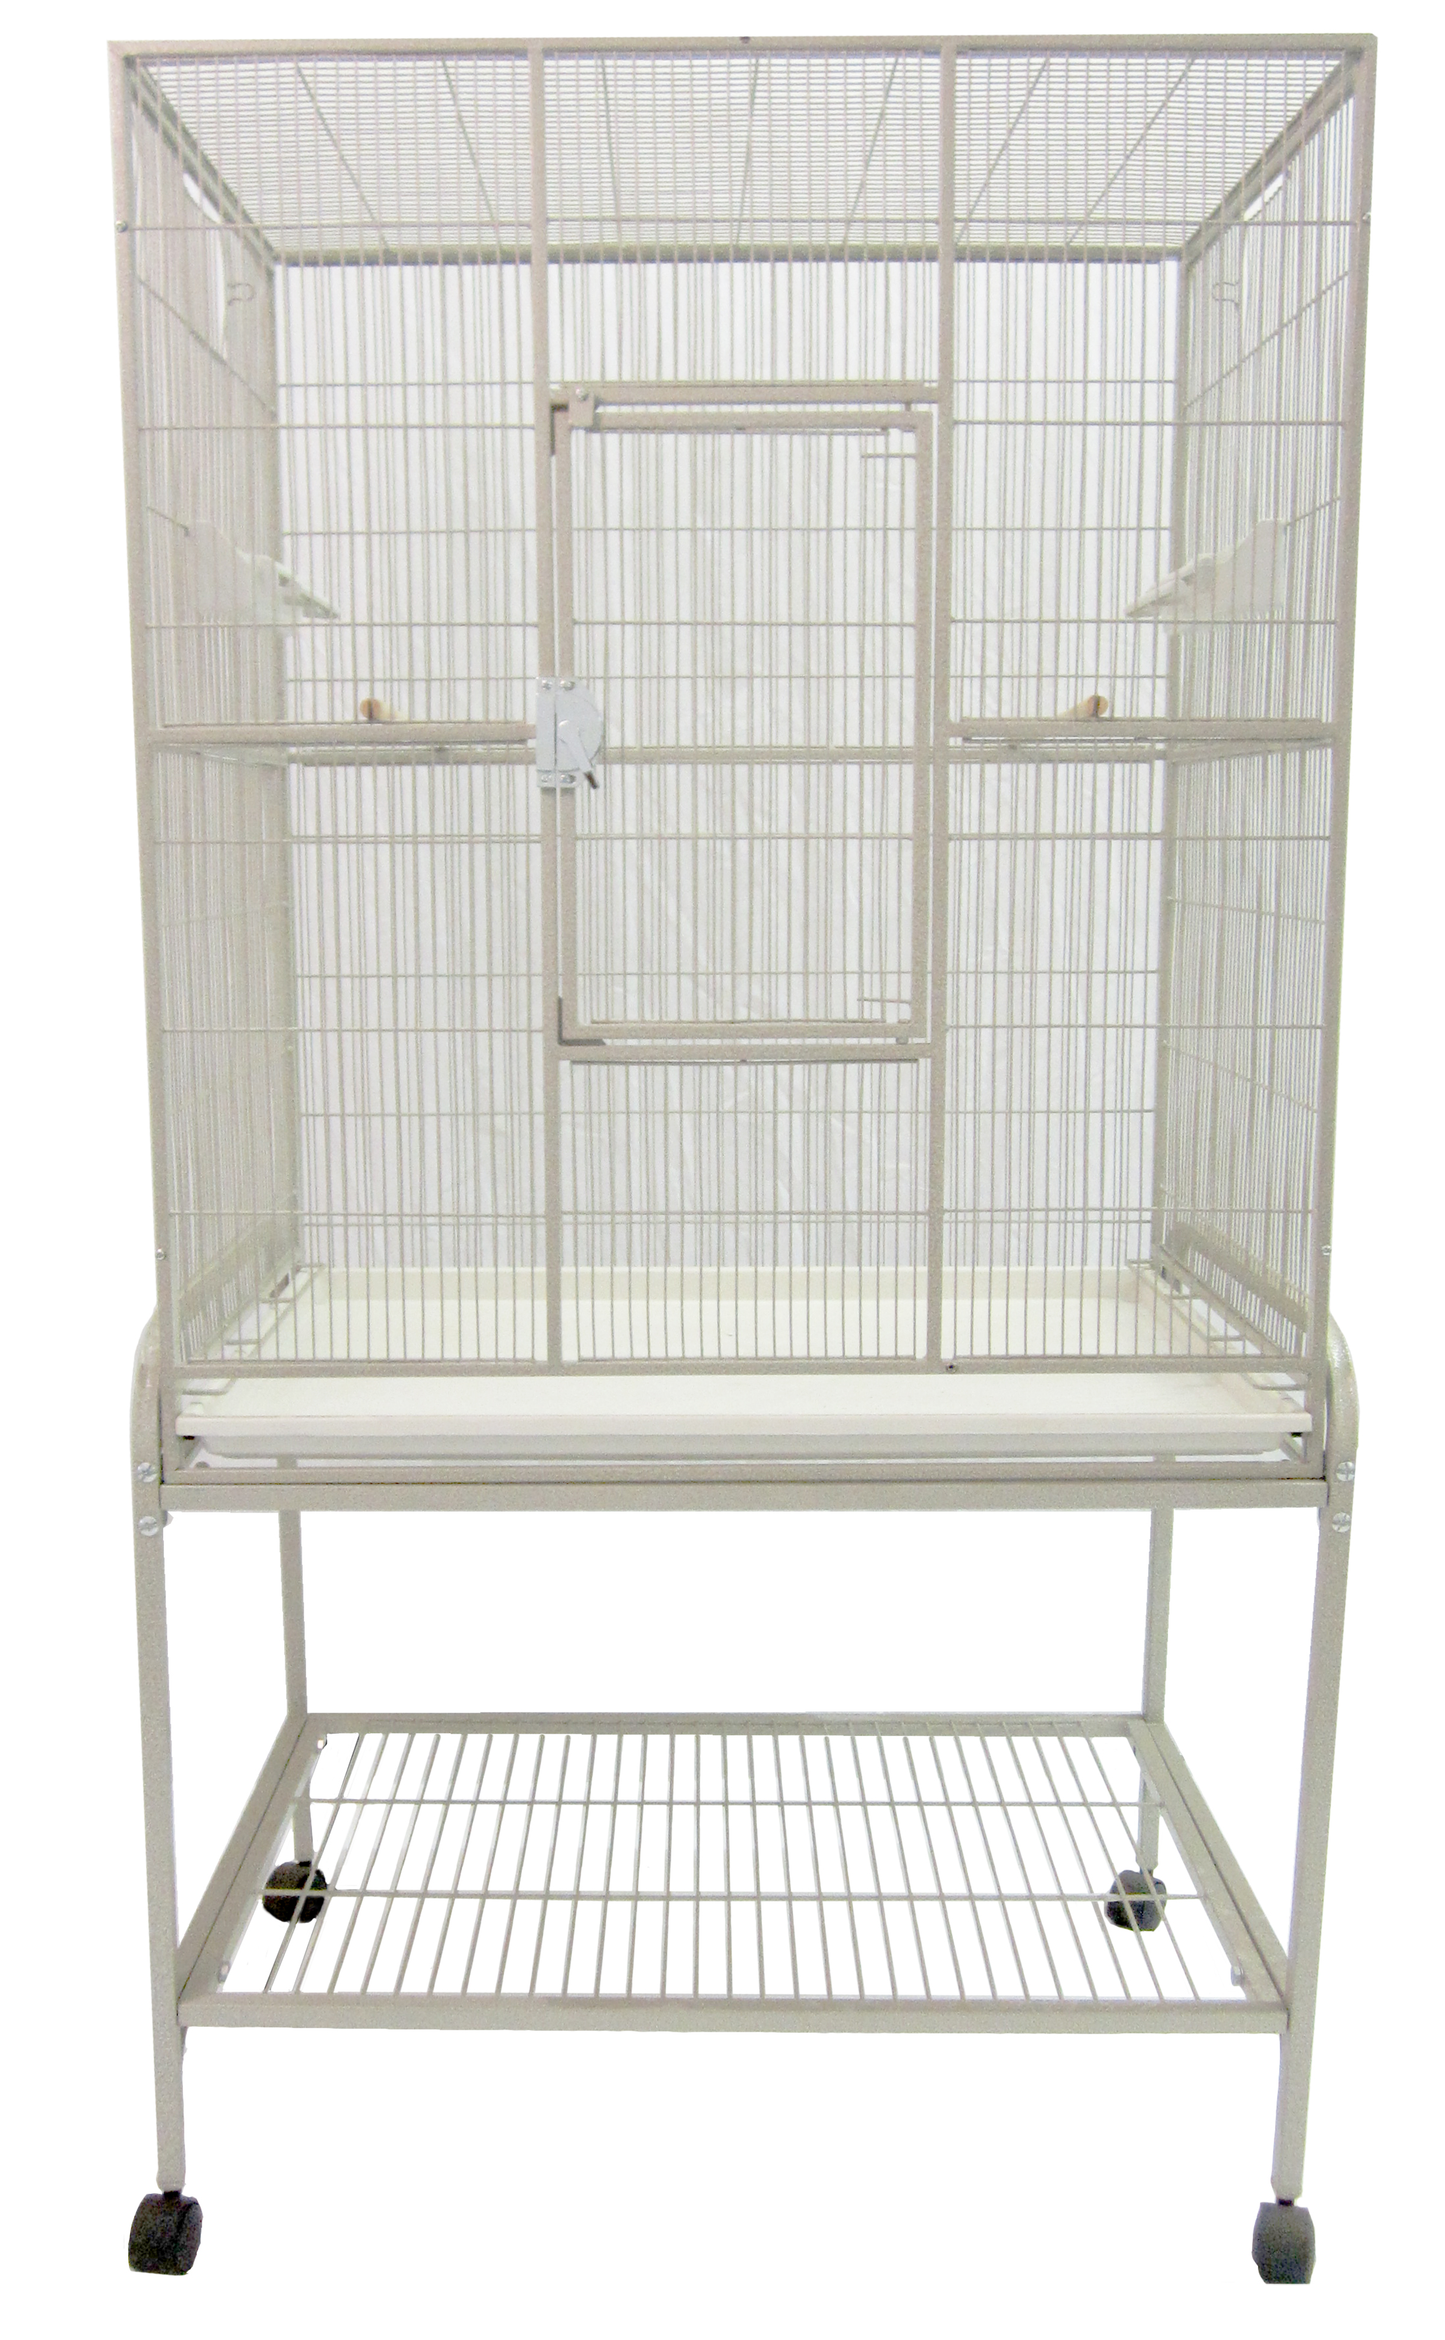 Flight Cages & Stand 32"x21"x63" (White)